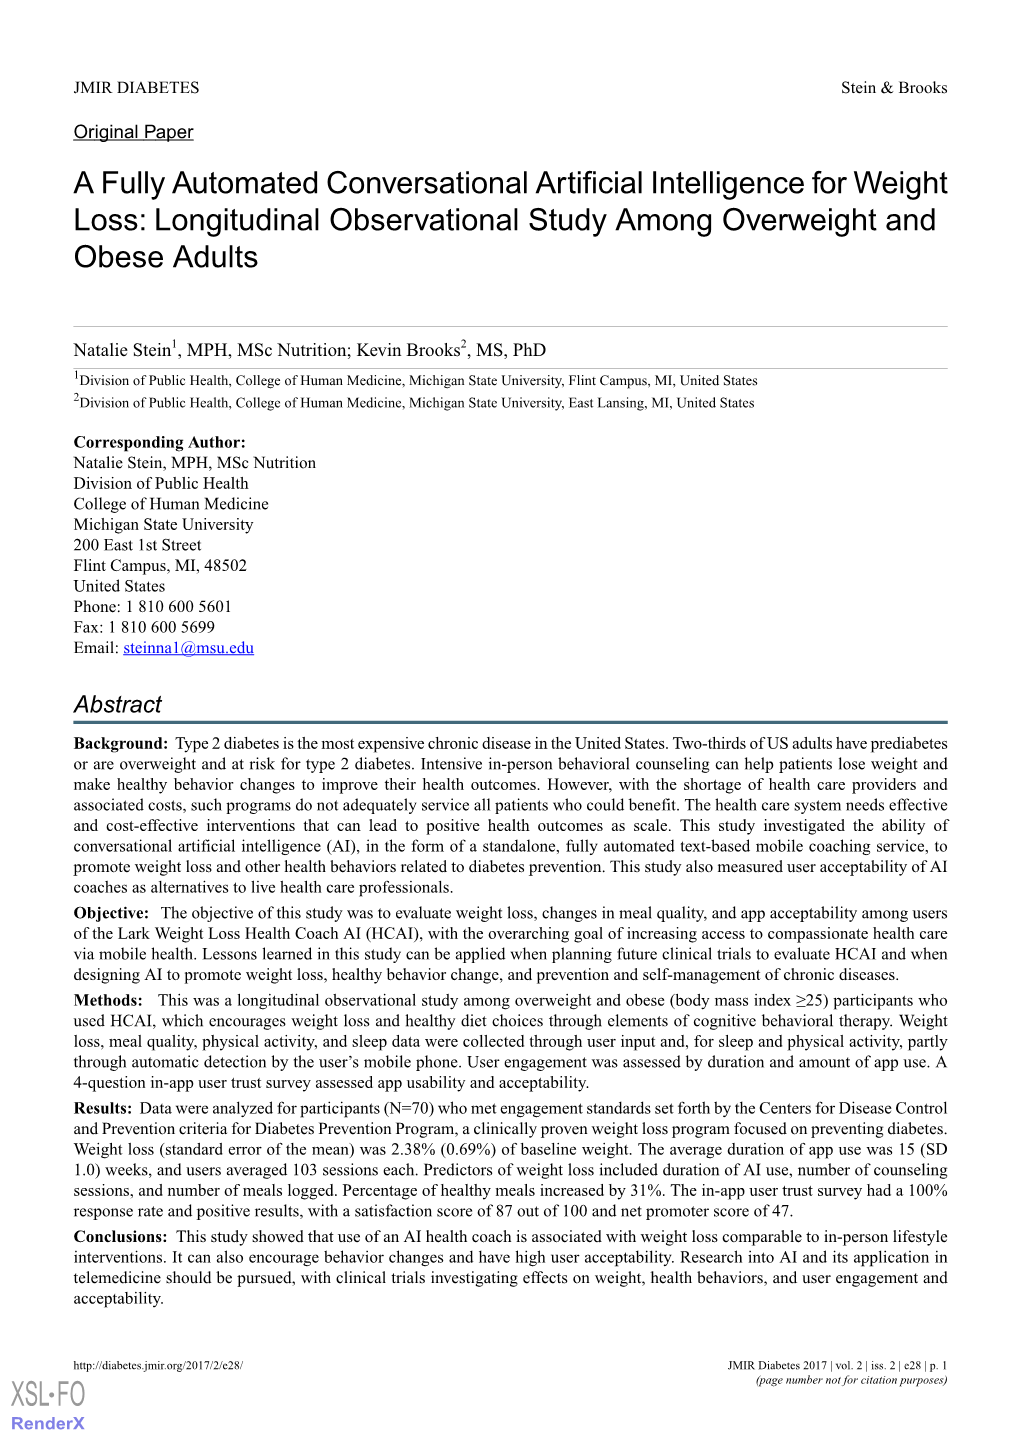 A Fully Automated Conversational Artificial Intelligence for Weight Loss: Longitudinal Observational Study Among Overweight and Obese Adults